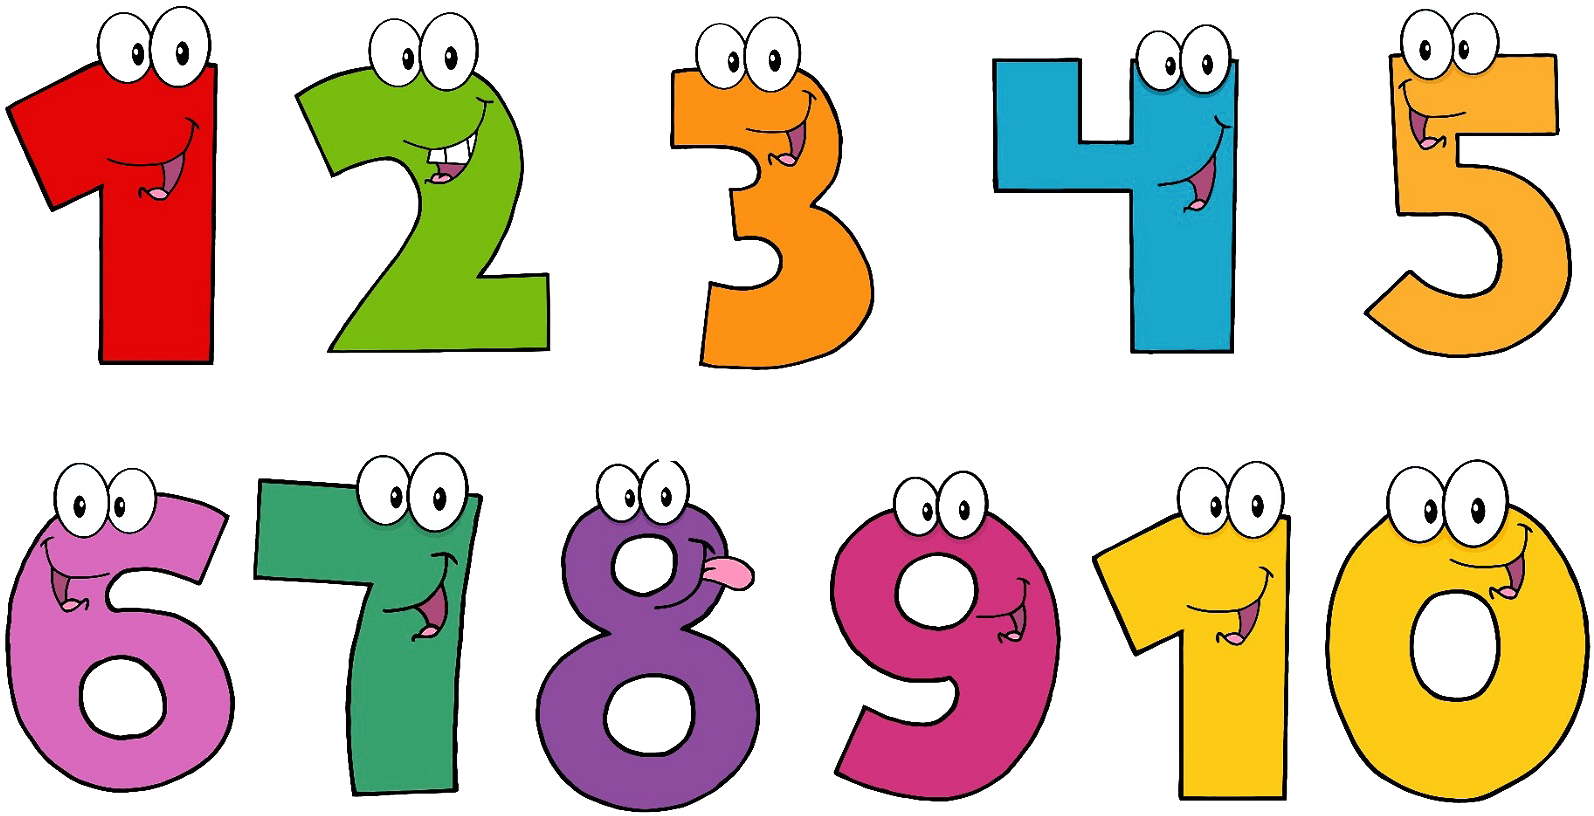 numbers in German from one to ten or 1 - 10